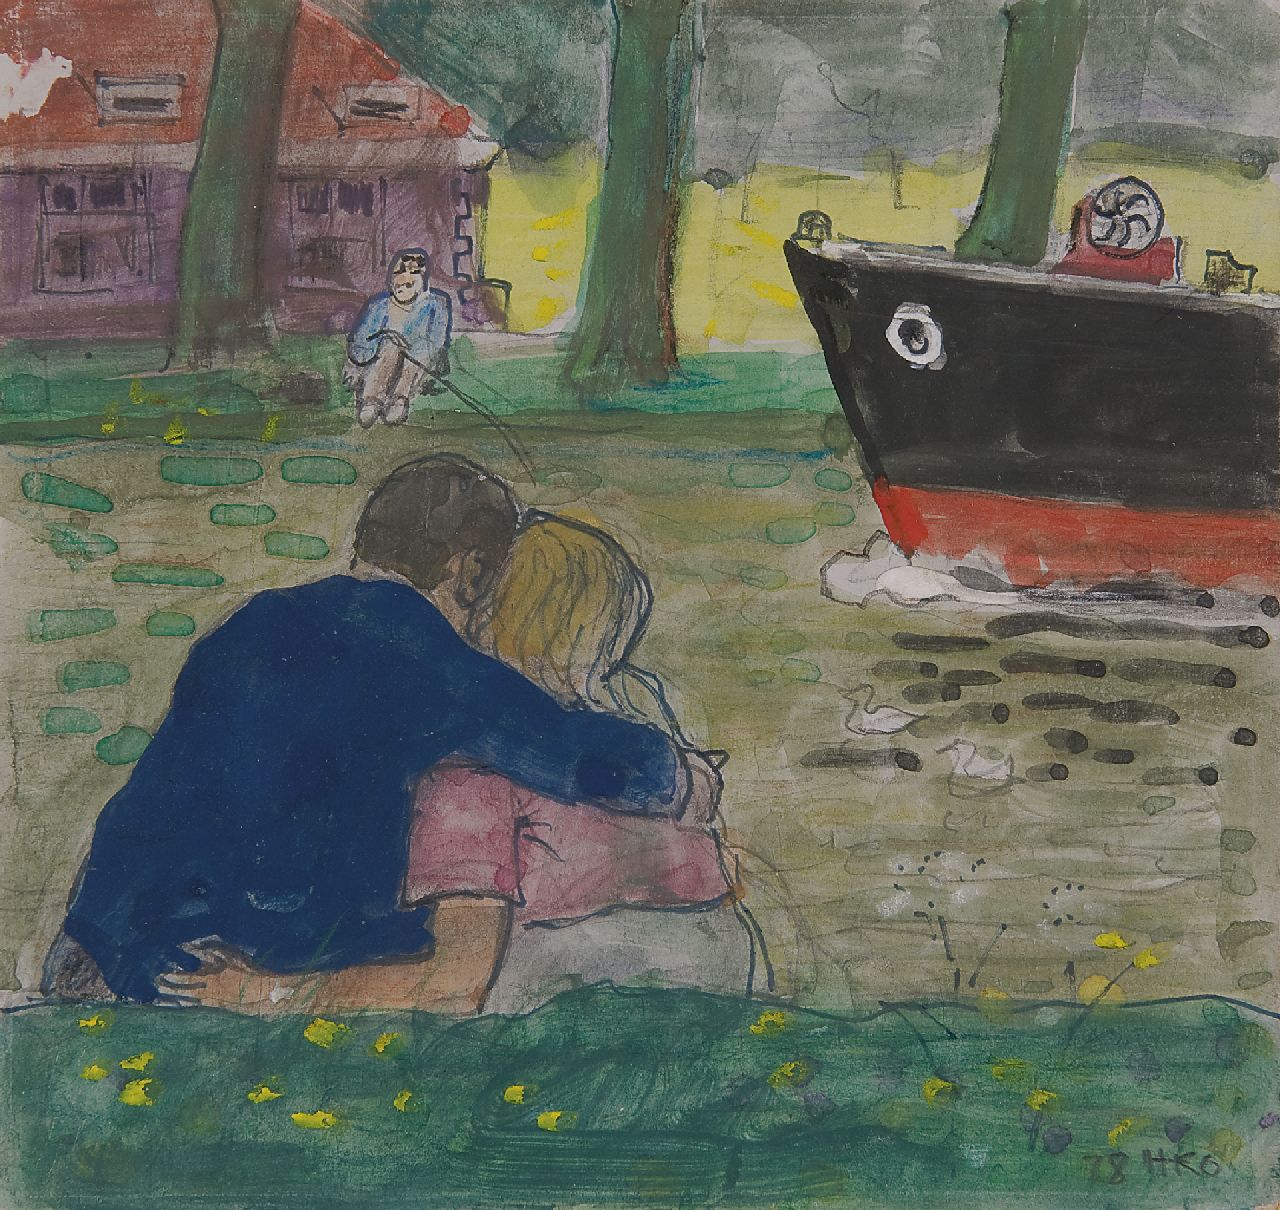 Kamerlingh Onnes H.H.  | 'Harm' Henrick Kamerlingh Onnes, A couple sitting on the banks of the Vliet in Delft, pen and watercolour on paper 15.0 x 15.8 cm, signed l.r. with monogram and dated '78